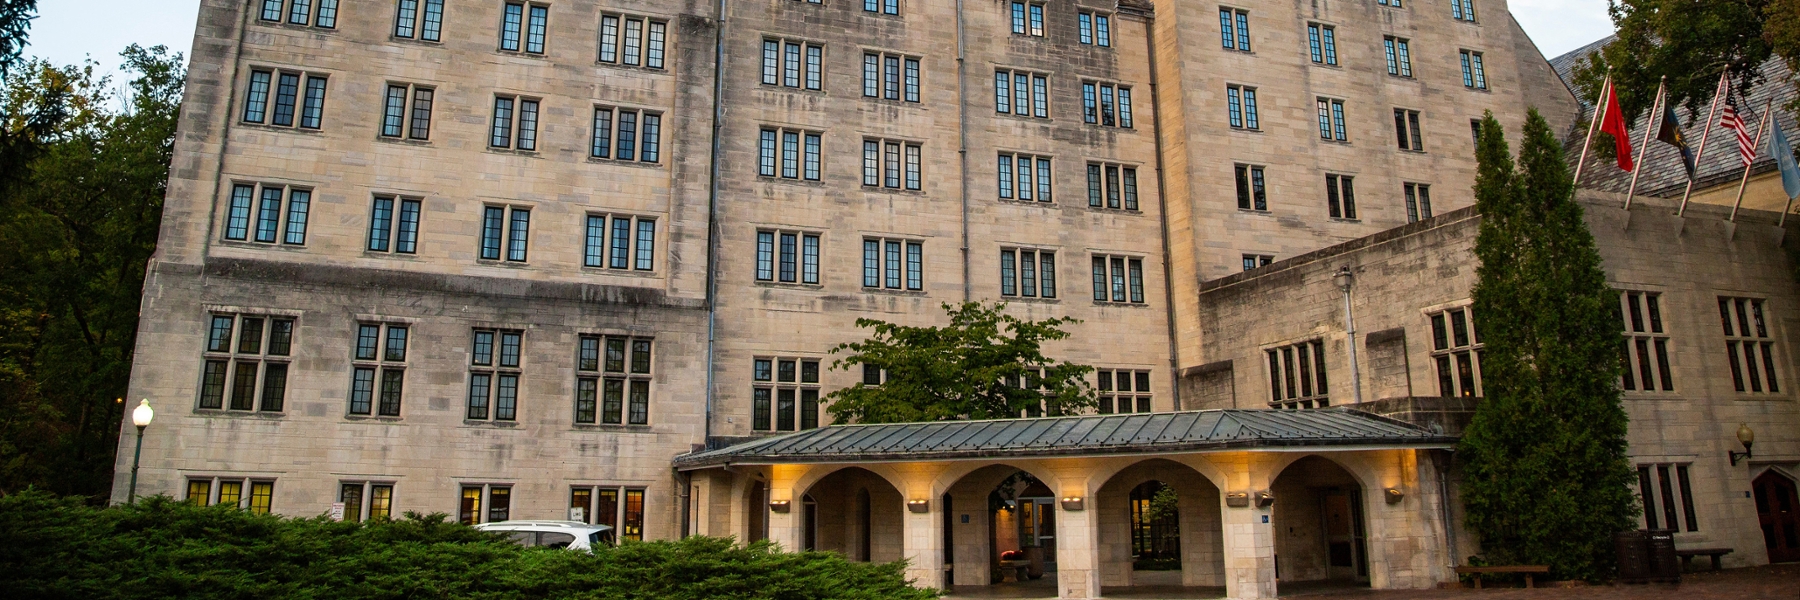 Biddle Hotel and Conference Center in the Indiana Memorial Union